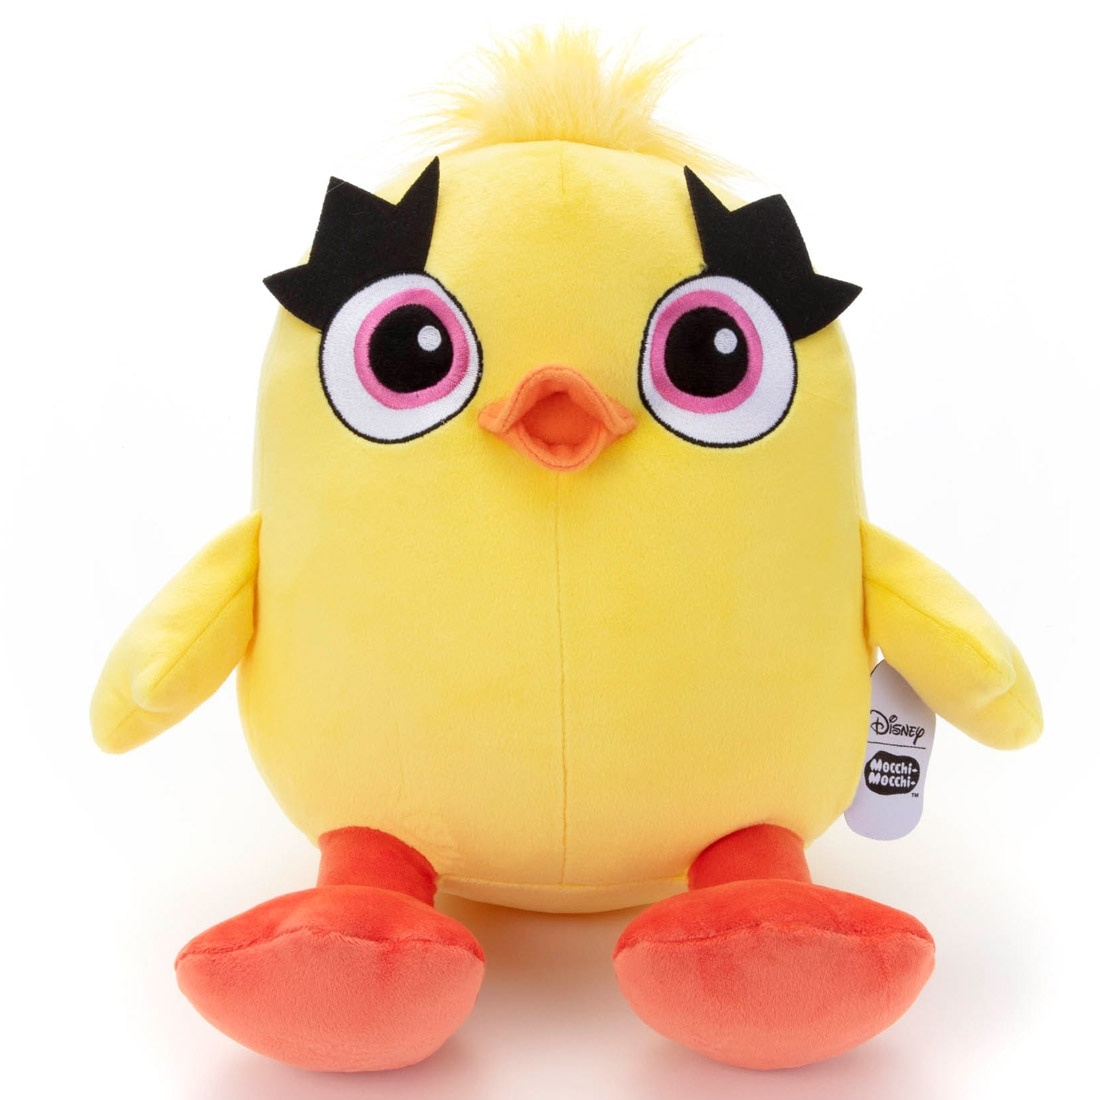 Disney Characters Disney Mocchi Mocchi Plush Toy Mm Toy Story 4 Ducky By Takara Tomy A R T S